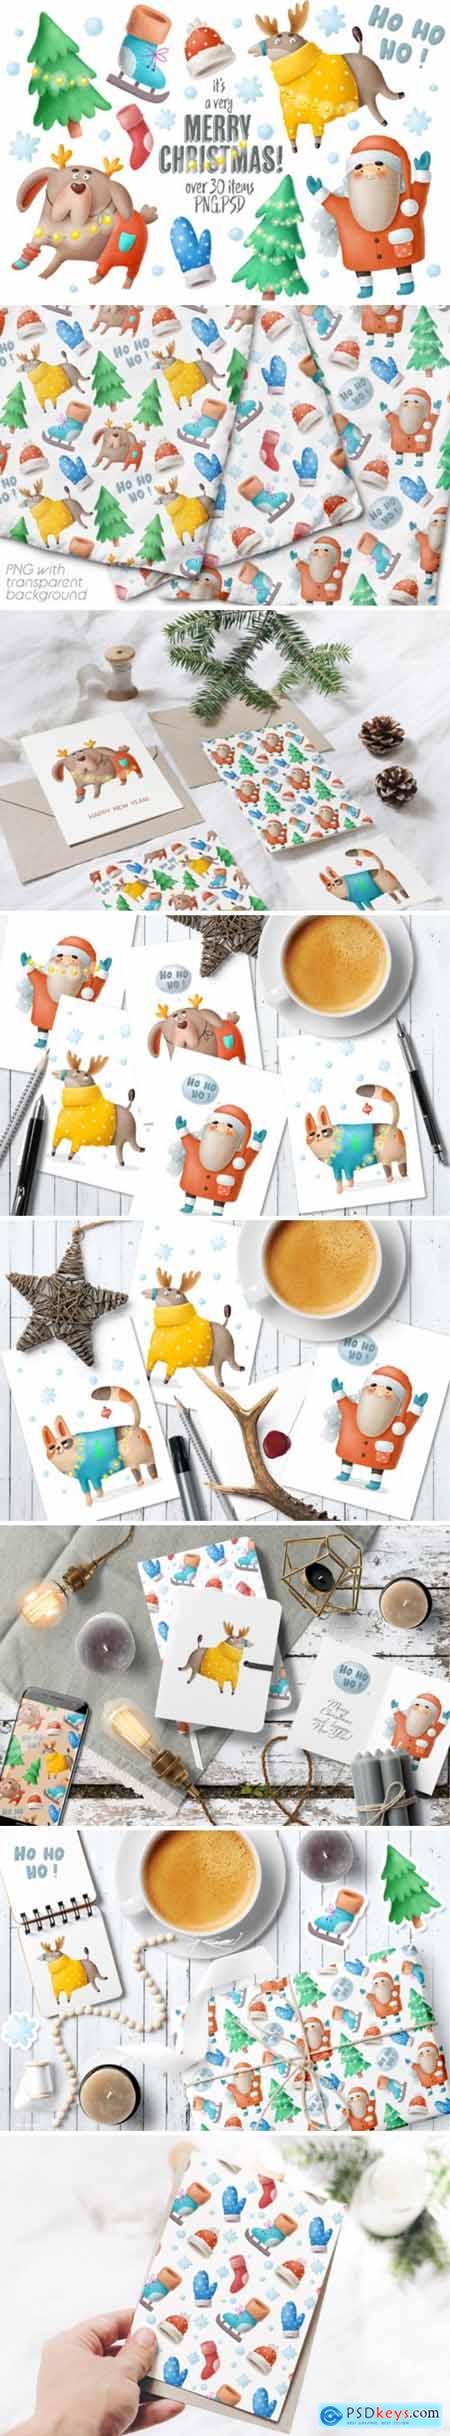 Christmas Clipart and Characters Set 2178307